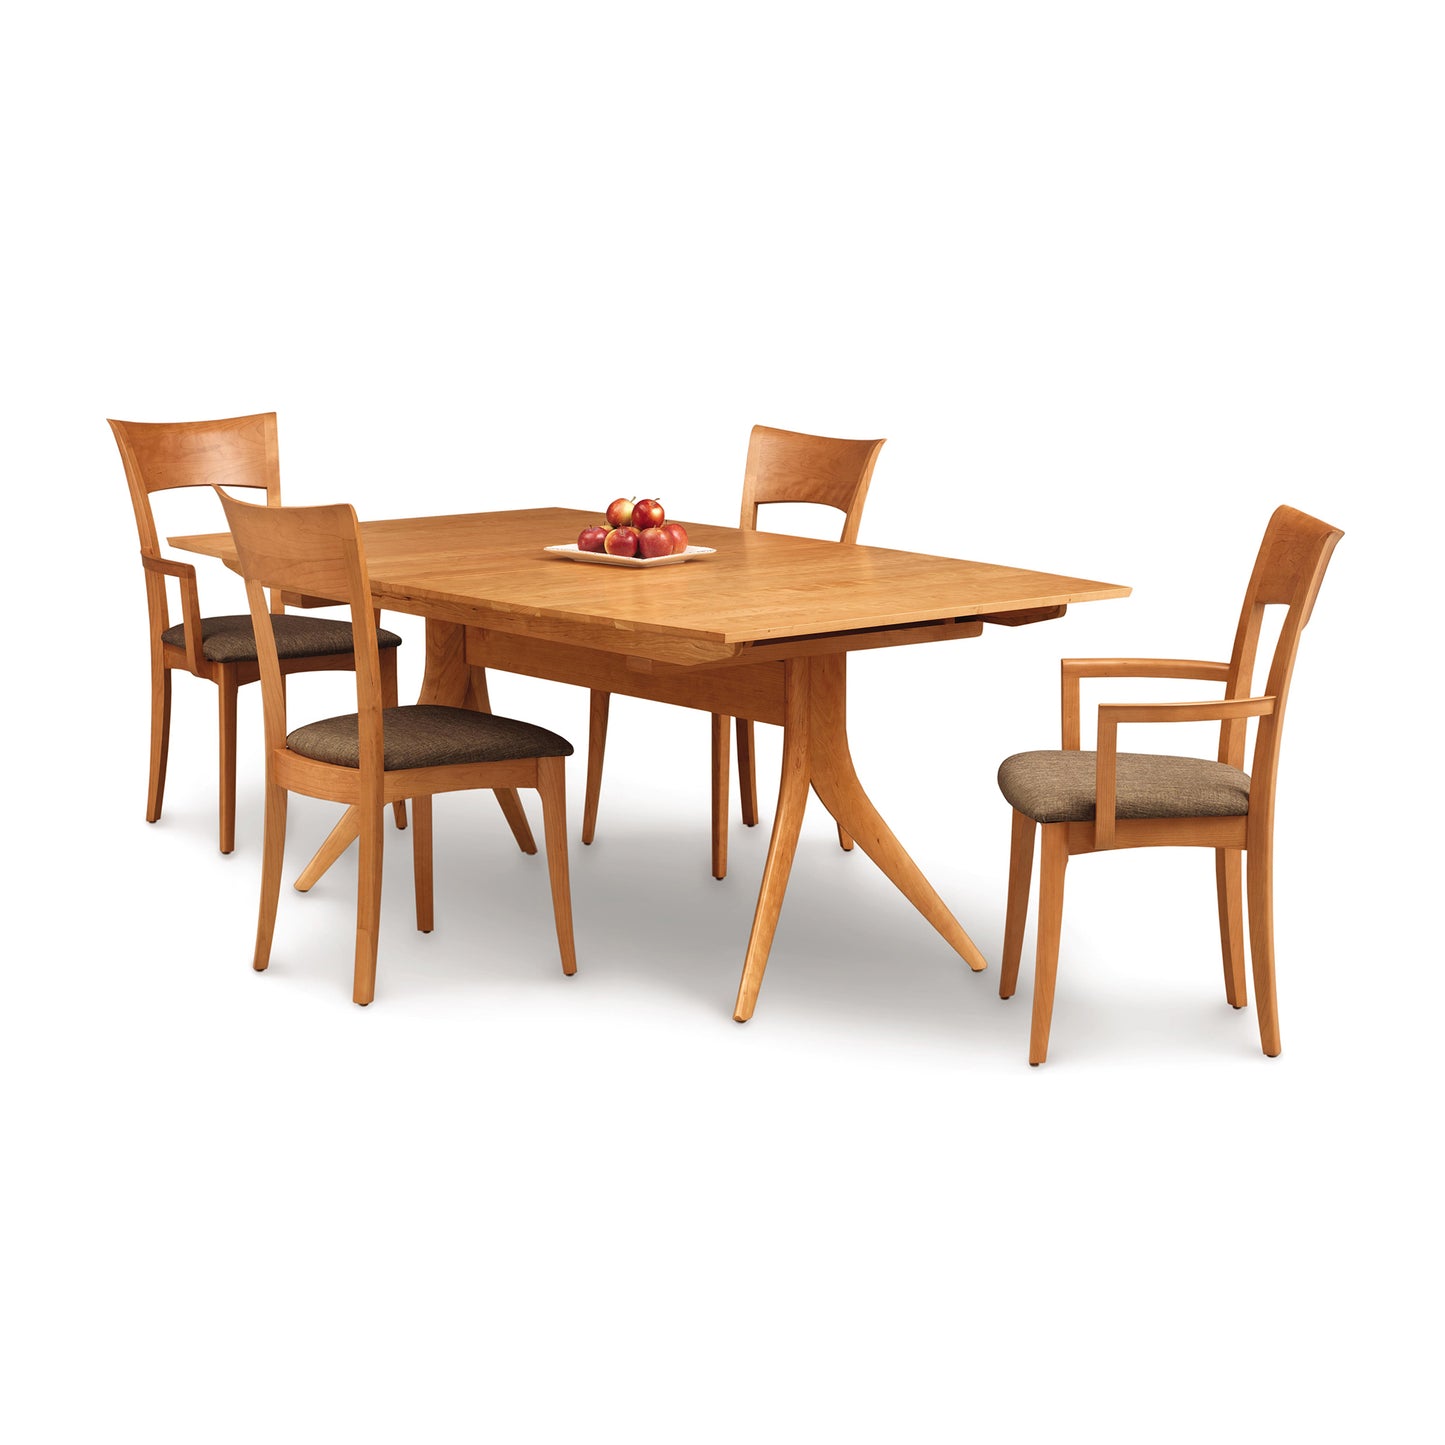 A solid American hardwood Catalina Trestle Extension Table with four matching chairs on a white background, with a small bowl of apples at the center of the table. (Brand: Copeland Furniture)